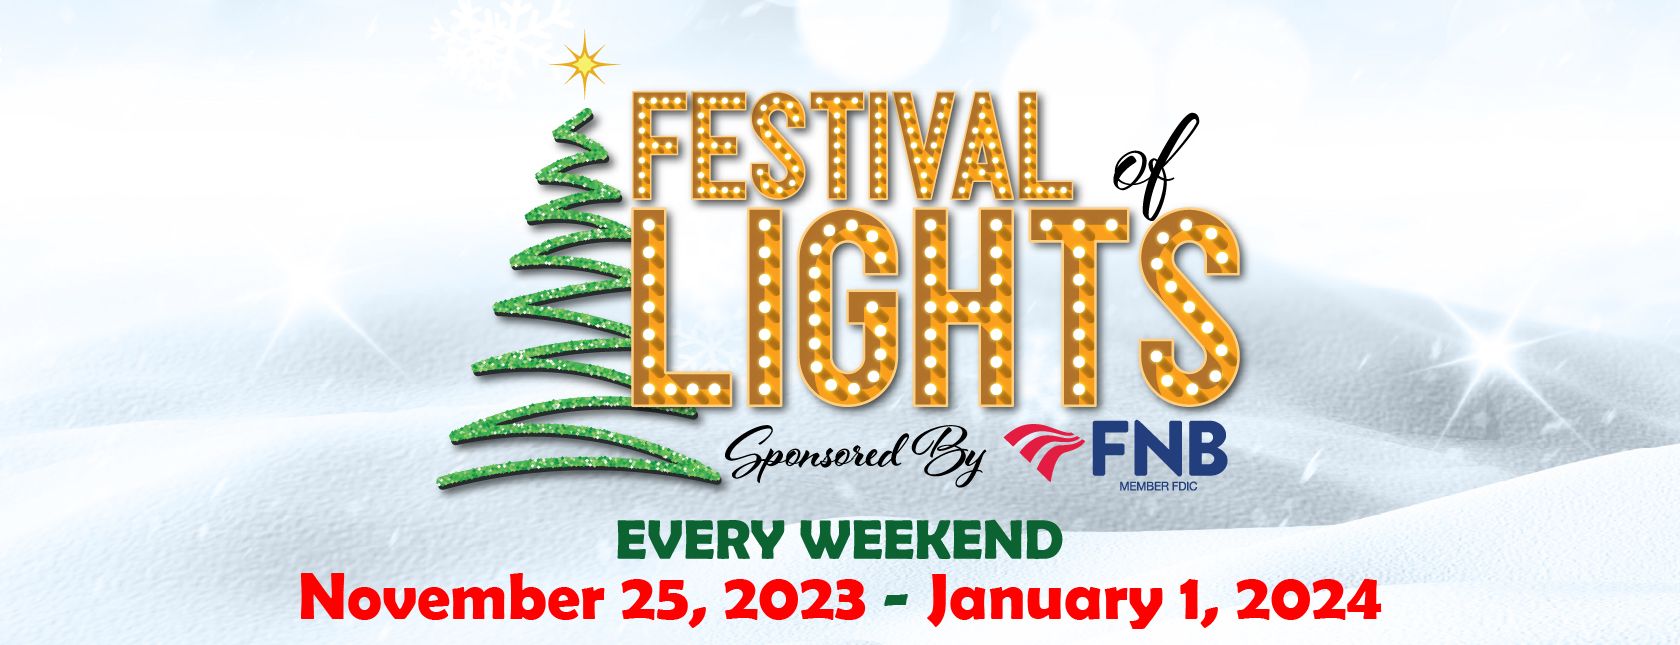 Festival of Lights in Mayfield